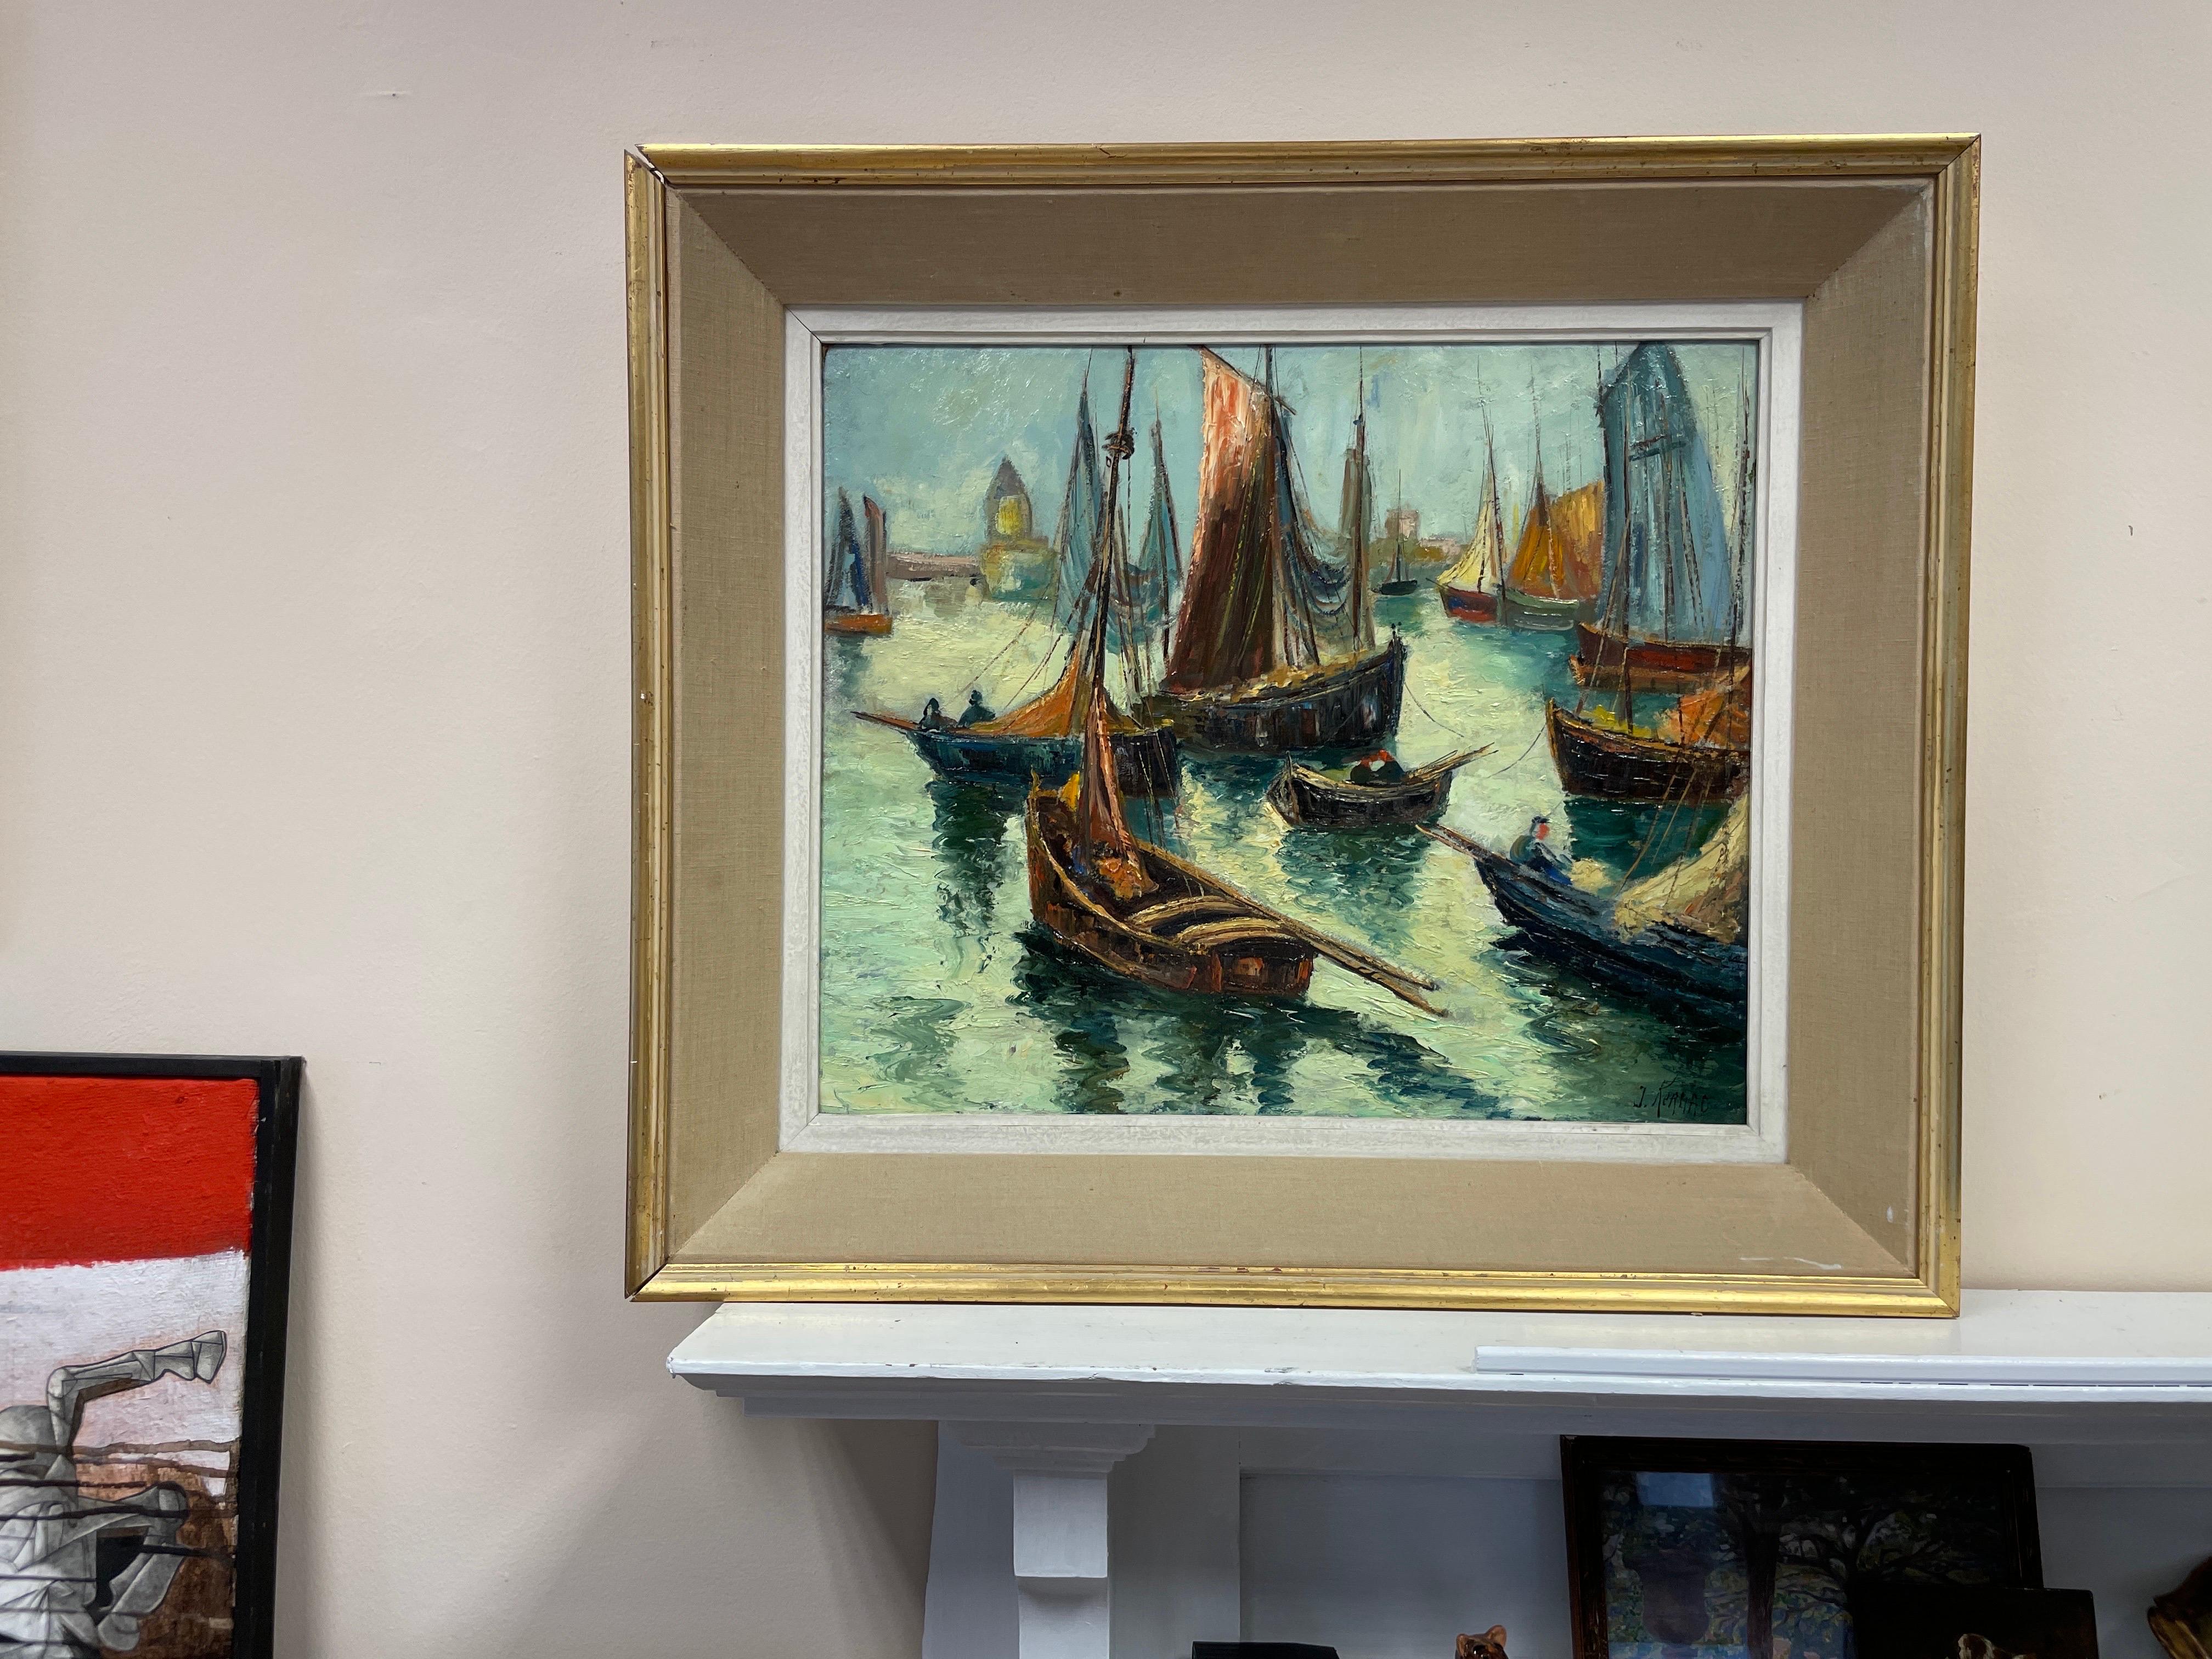 1950's French Fishing Boats in Sleepy Harbour Beautiful Impasto Sludgy Oil - Painting by French Mid Century